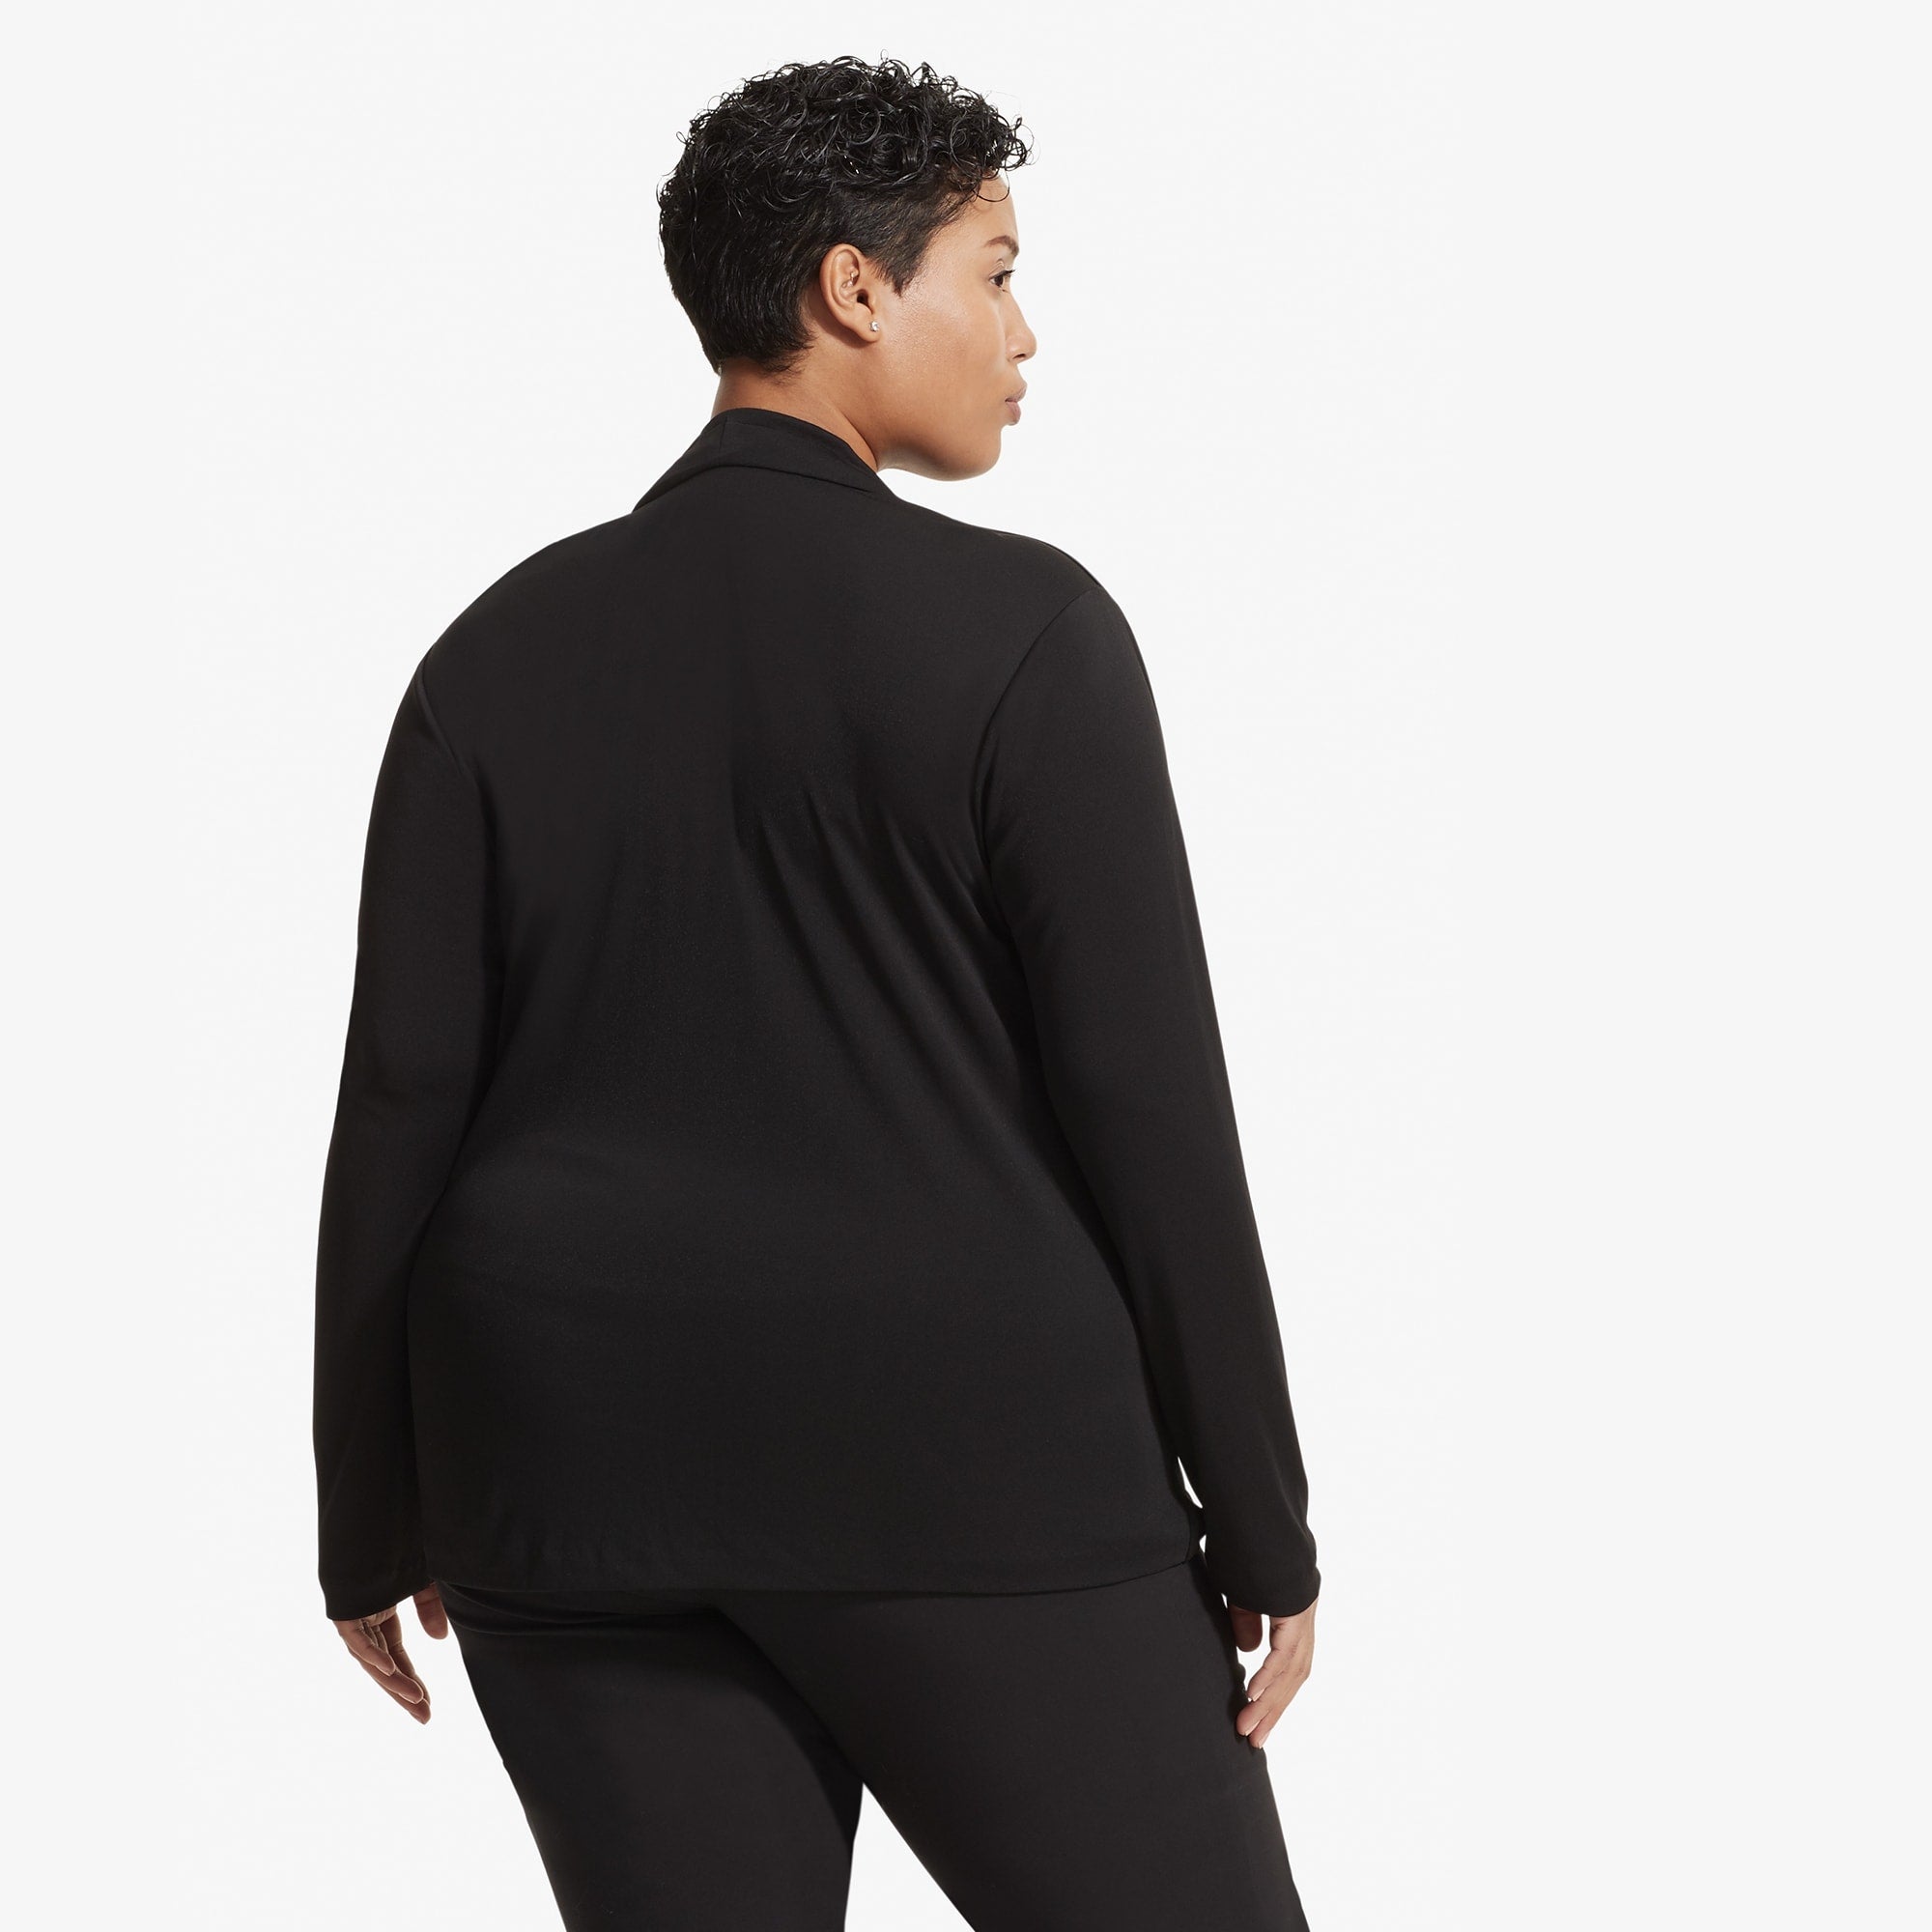 Back image of a woman standing wearing the Alma top in Black